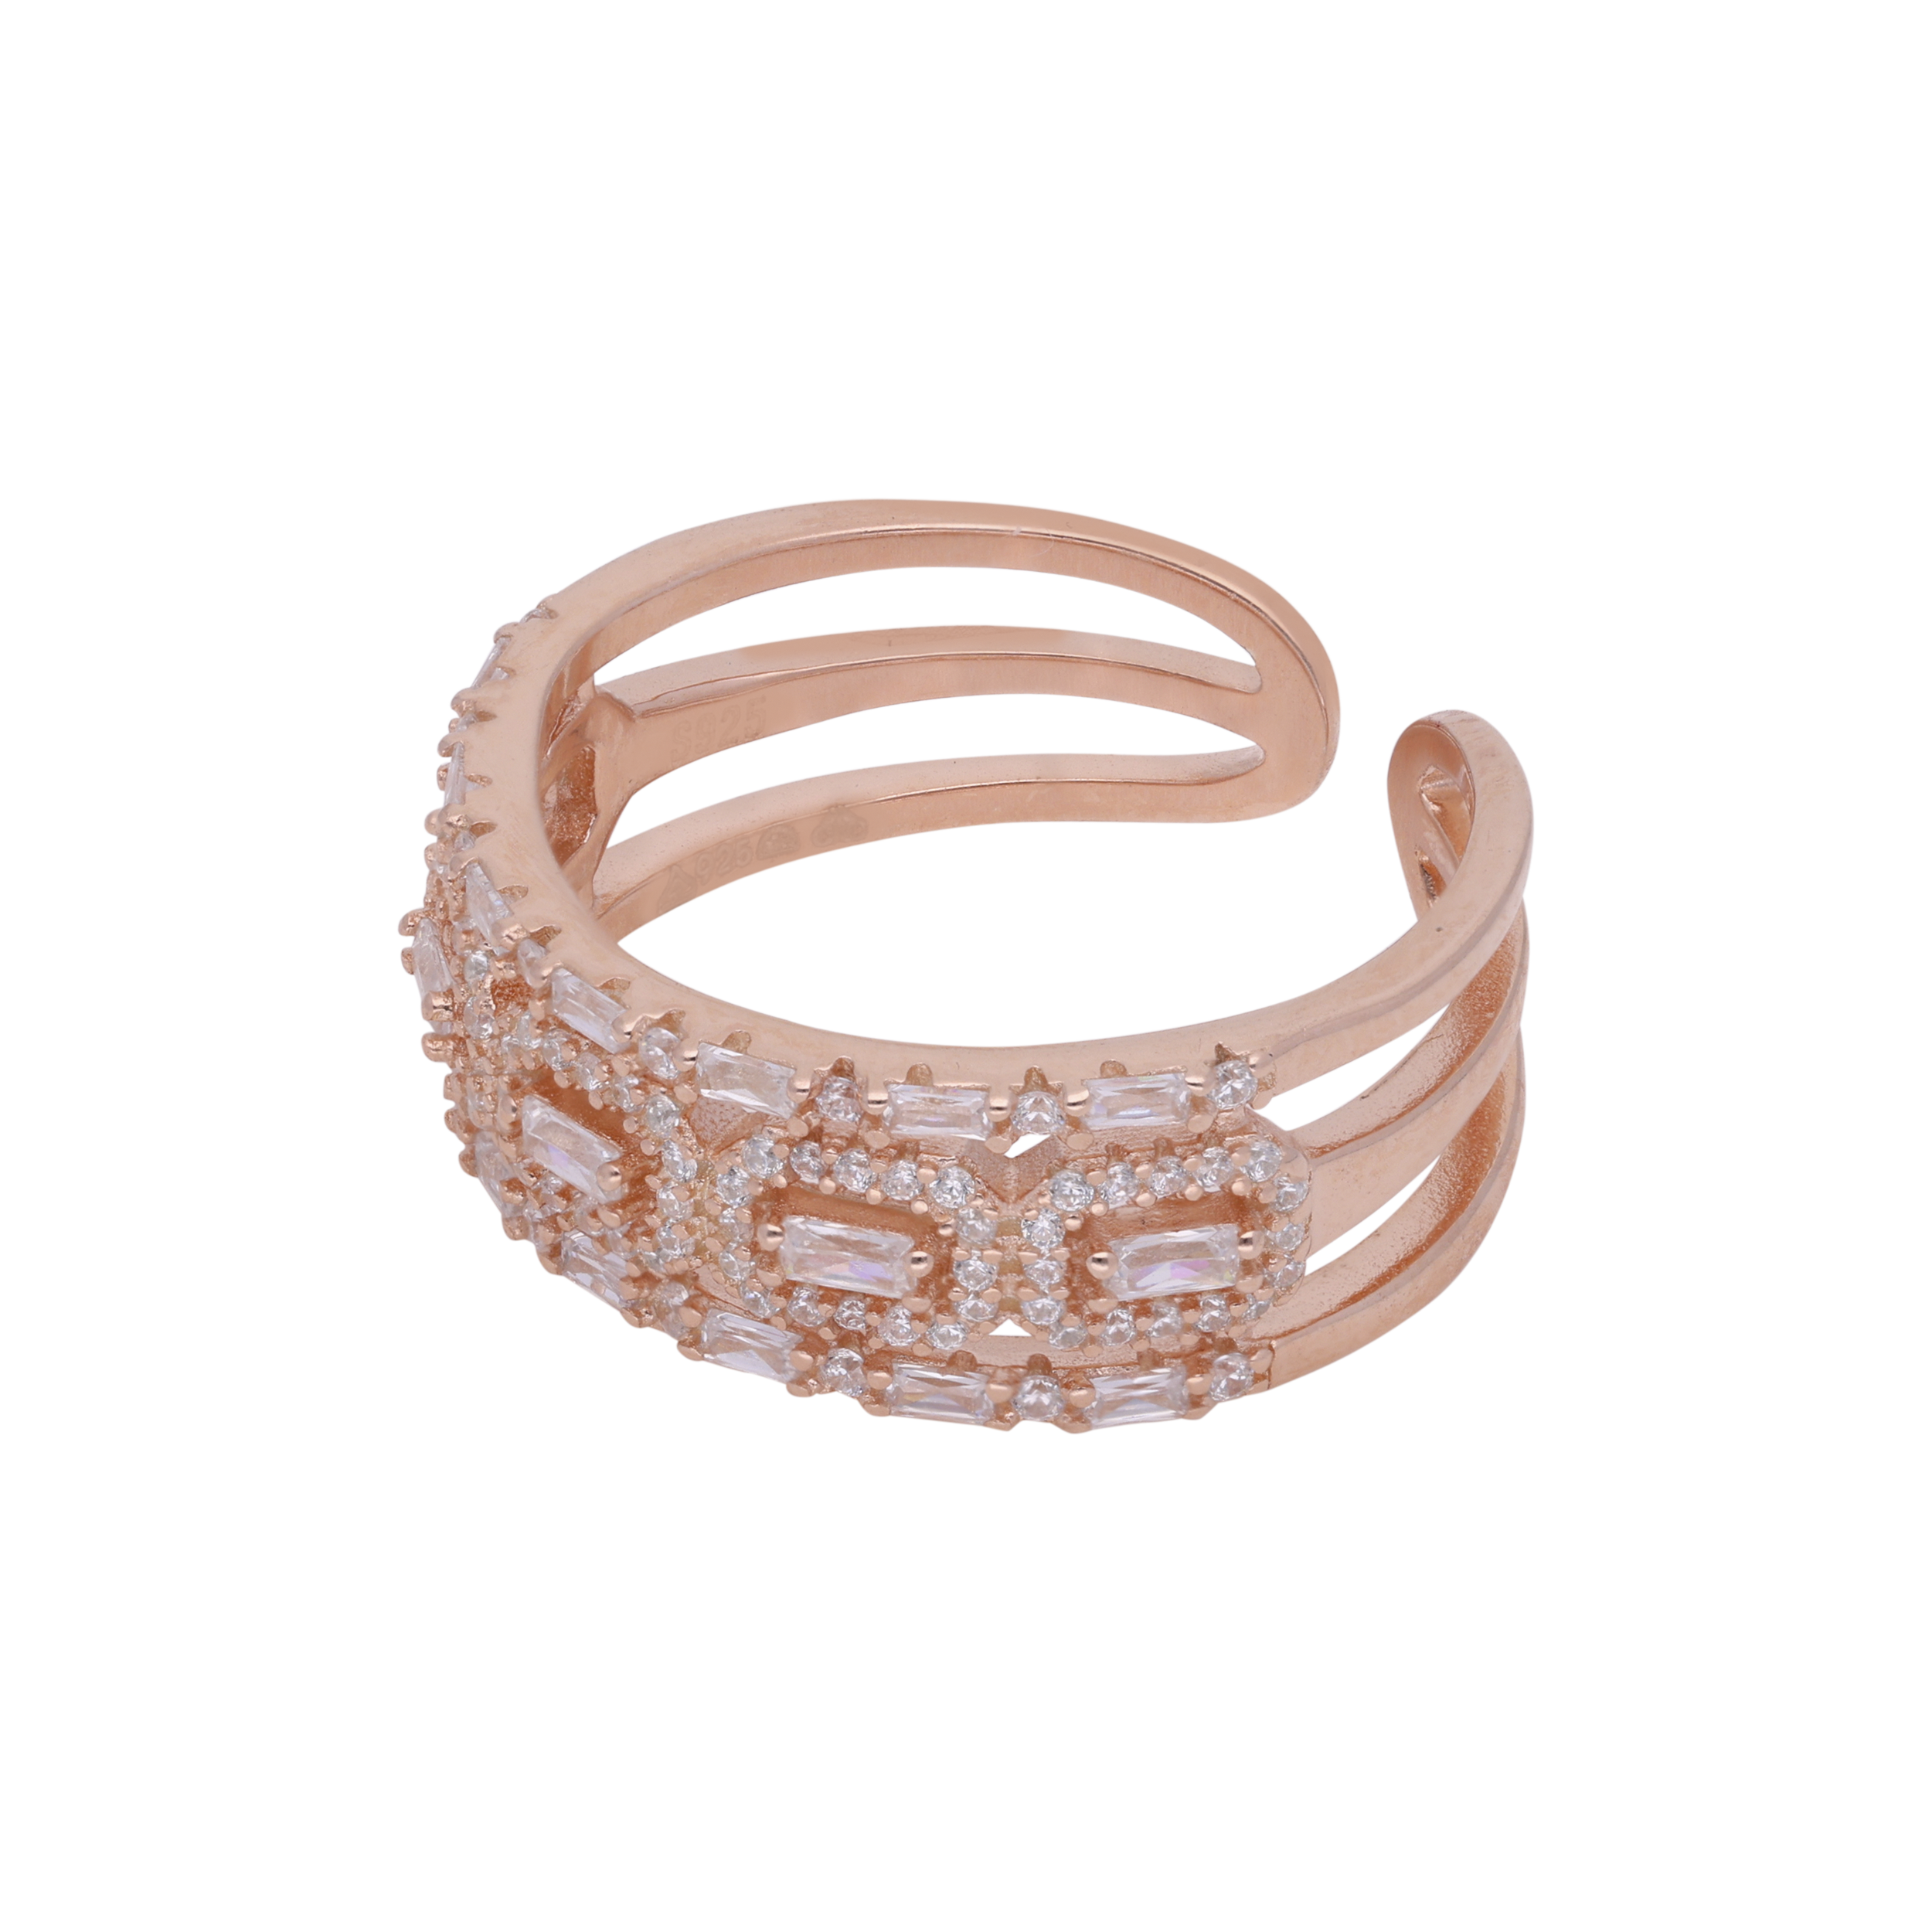 Elegance Refined: Sterling Silver Open Ring with Rose Gold Accents and Cubic Zirconia Embellishments | SKU : 0019891477, 0019891460